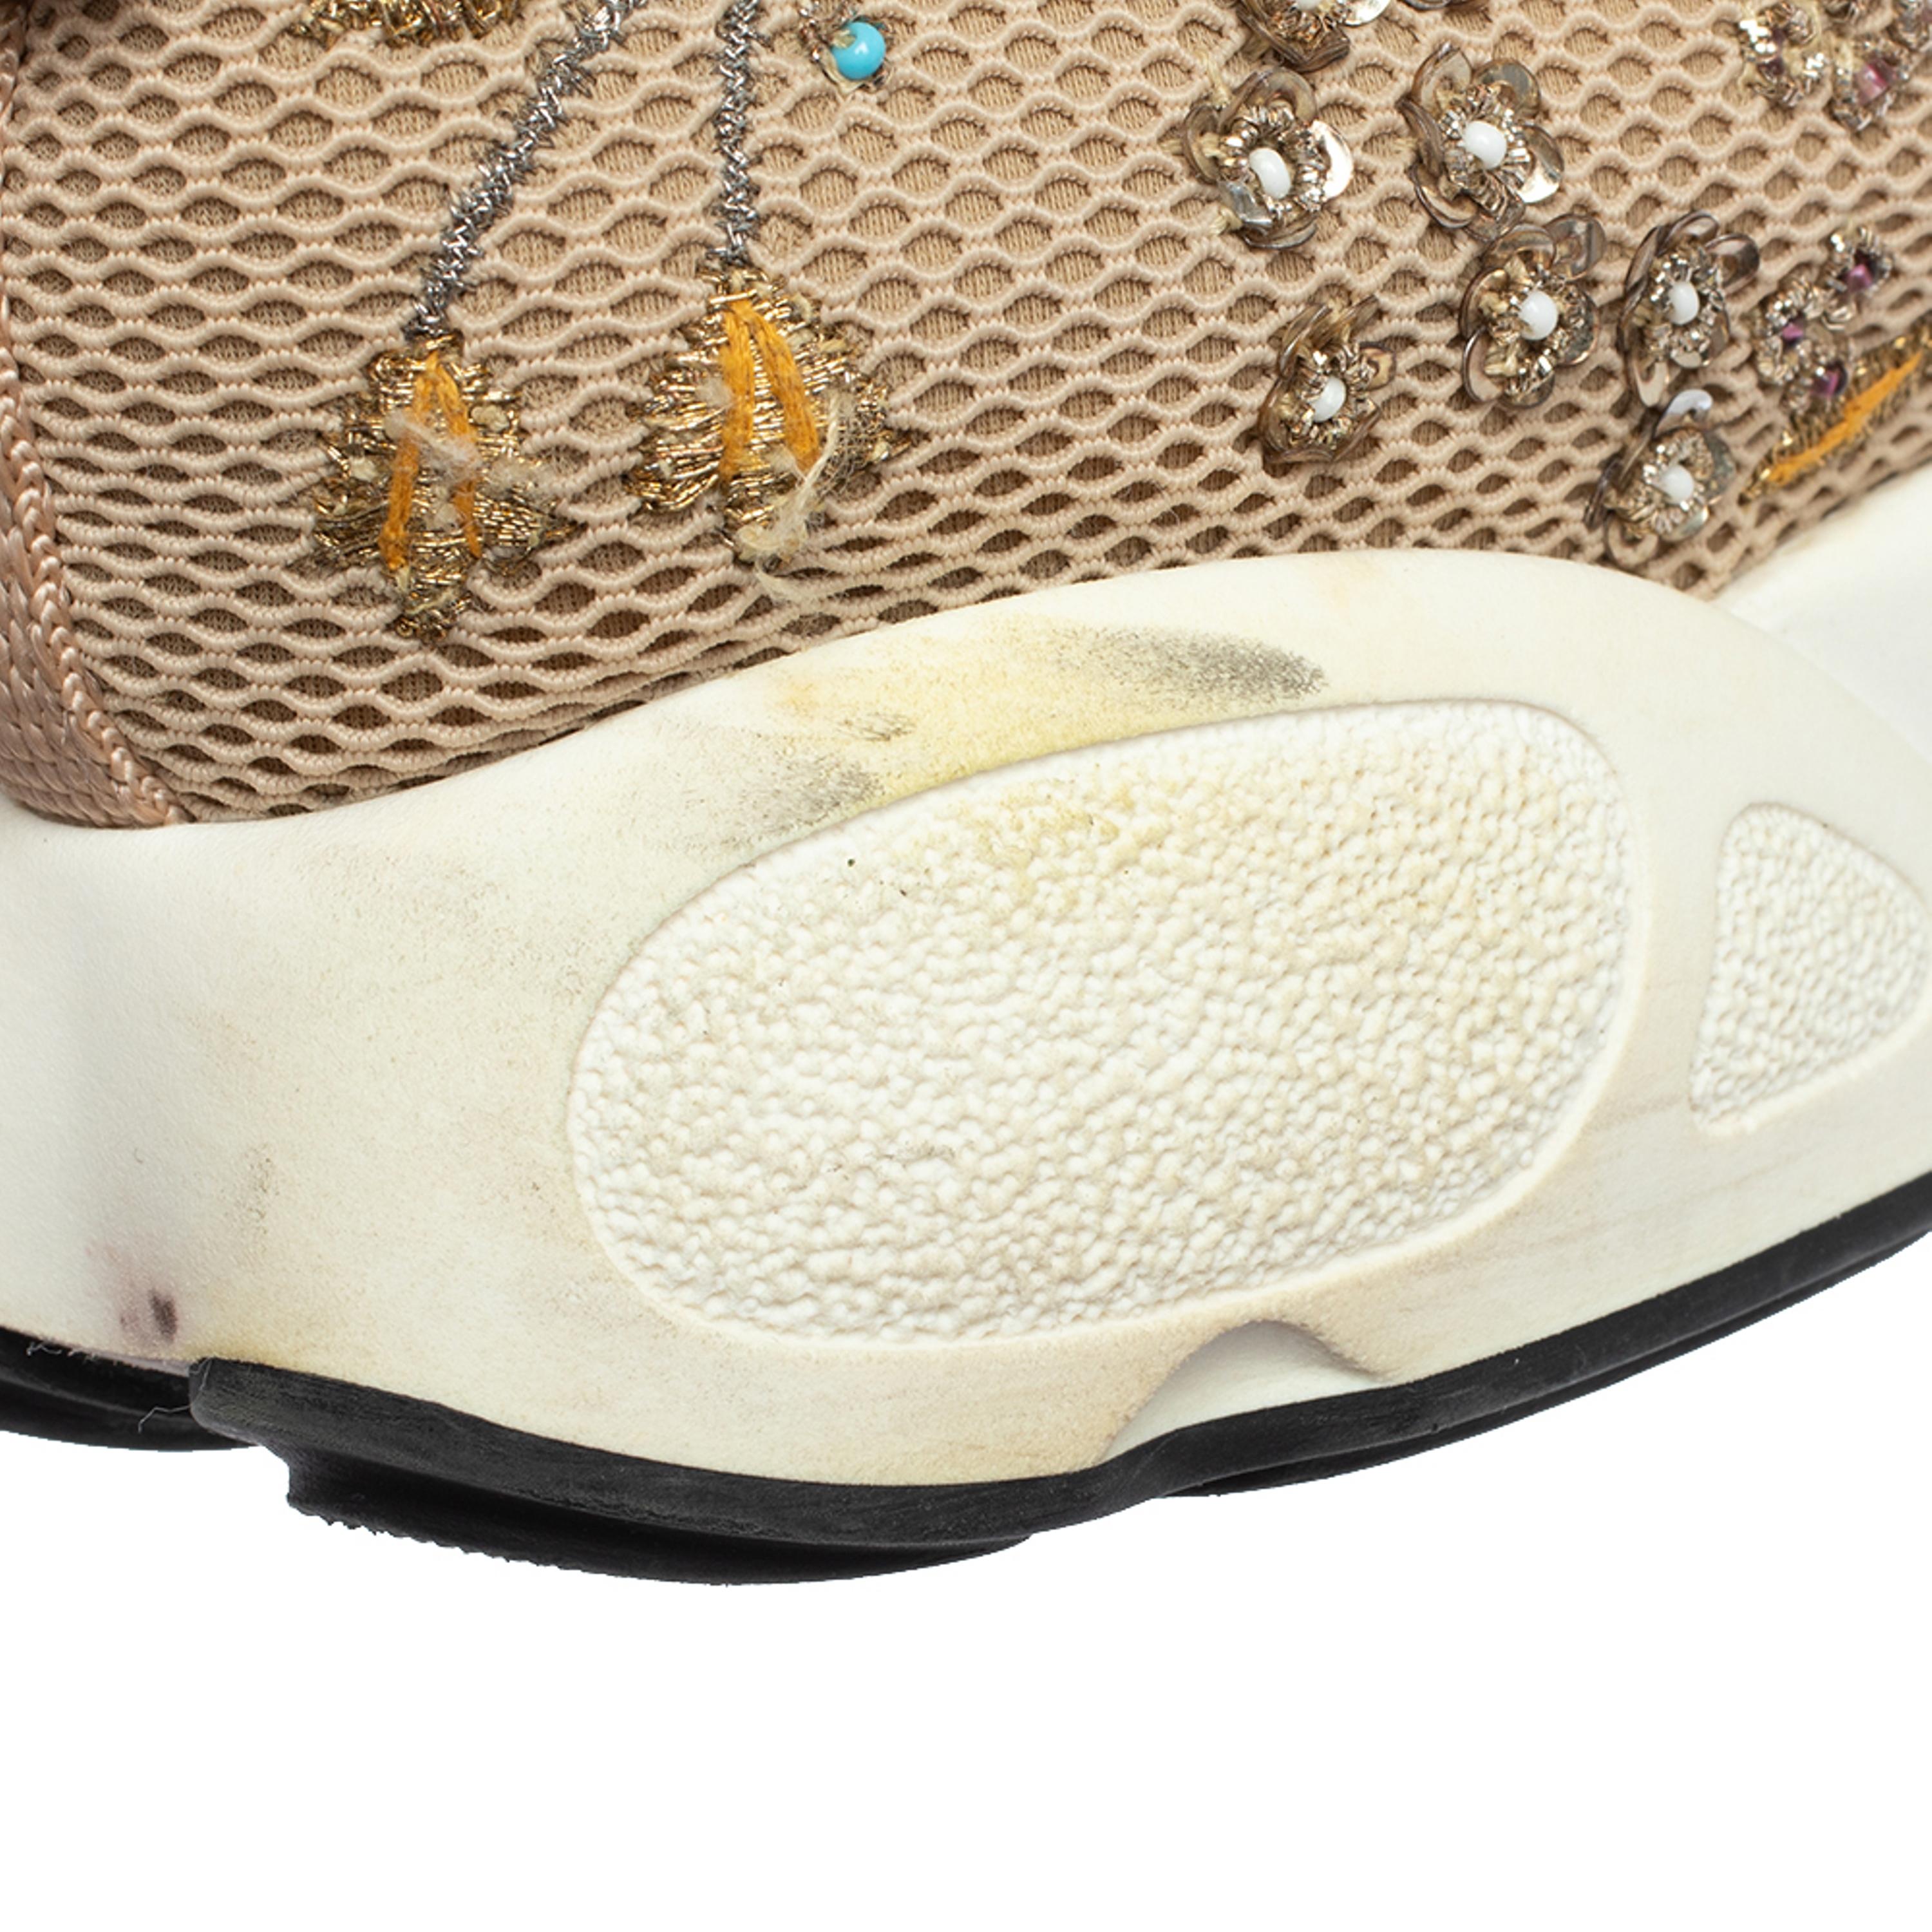 Dior Beige Mesh Fusion Floral Embellished And Embroidered Sneakers Size 38.5 1